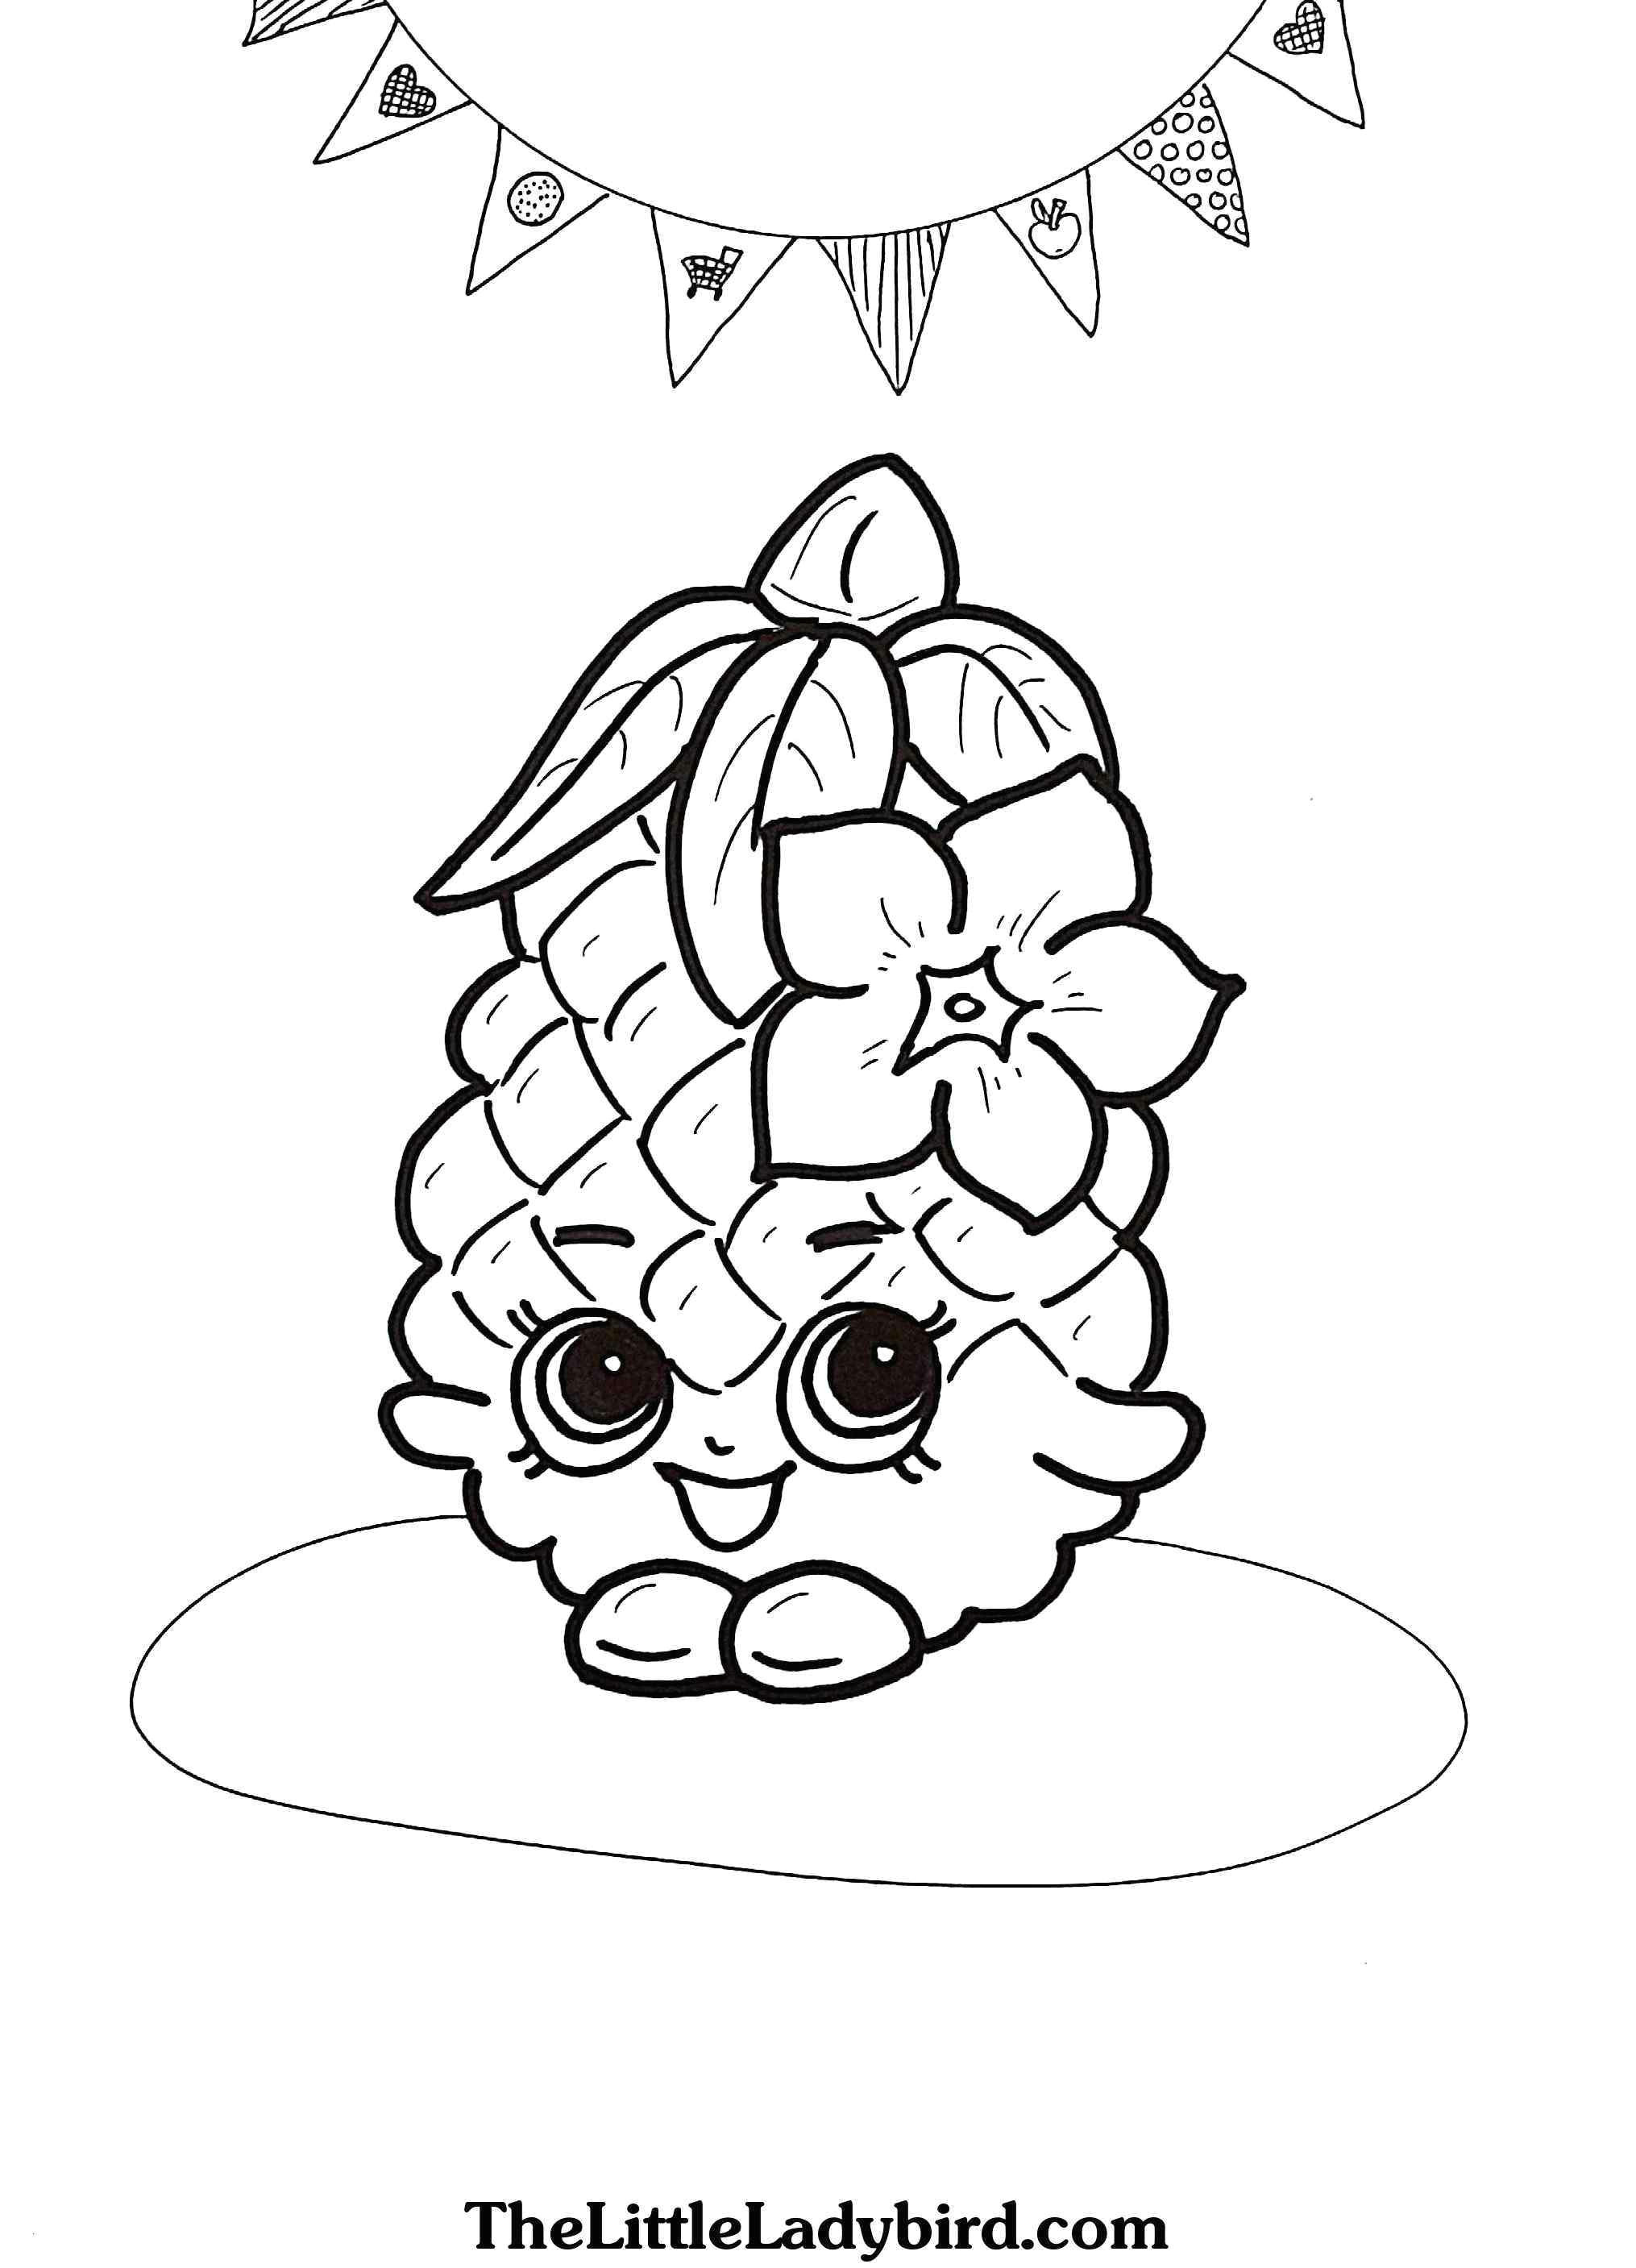 printable kids coloring sheets beautiful cool coloring page unique witch coloring pages new crayola pages 0d